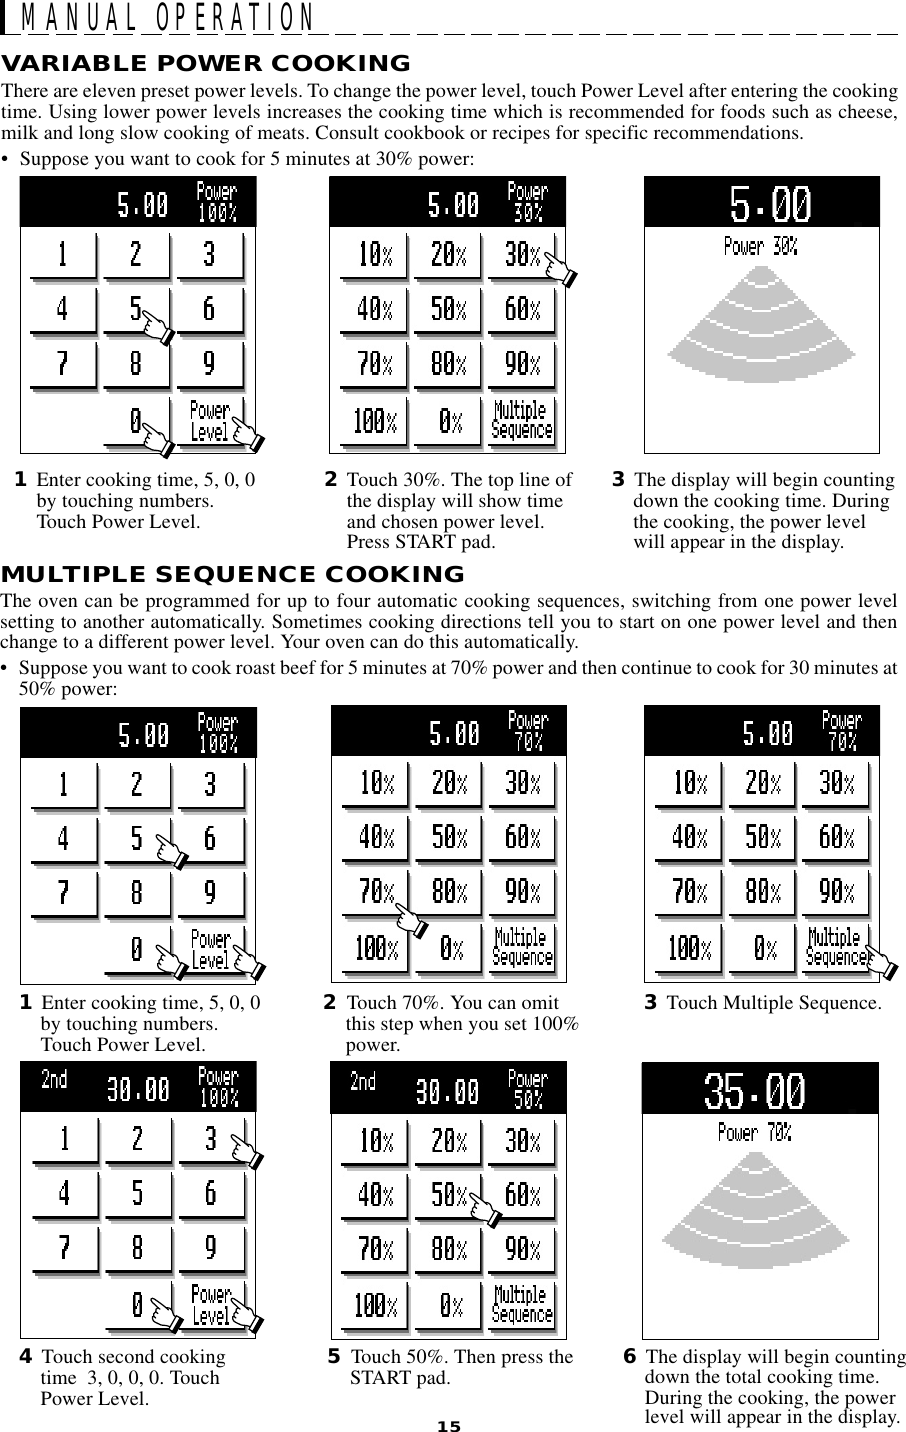 15MULTIPLE SEQUENCE COOKINGThe oven can be programmed for up to four automatic cooking sequences, switching from one power levelsetting to another automatically. Sometimes cooking directions tell you to start on one power level and thenchange to a different power level. Your oven can do this automatically.• Suppose you want to cook roast beef for 5 minutes at 70% power and then continue to cook for 30 minutes at50% power:MANUAL OPERATIONVARIABLE POWER COOKINGThere are eleven preset power levels. To change the power level, touch Power Level after entering the cookingtime. Using lower power levels increases the cooking time which is recommended for foods such as cheese,milk and long slow cooking of meats. Consult cookbook or recipes for specific recommendations.• Suppose you want to cook for 5 minutes at 30% power:1Enter cooking time, 5, 0, 0by touching numbers.Touch Power Level.2Touch 30%. The top line ofthe display will show timeand chosen power level.Press START pad.3The display will begin countingdown the cooking time. Duringthe cooking, the power levelwill appear in the display.2Touch 70%. You can omitthis step when you set 100%power.1Enter cooking time, 5, 0, 0by touching numbers.Touch Power Level.6The display will begin countingdown the total cooking time.During the cooking, the powerlevel will appear in the display.3Touch Multiple Sequence.5Touch 50%. Then press theSTART pad.4Touch second cookingtime  3, 0, 0, 0. TouchPower Level.